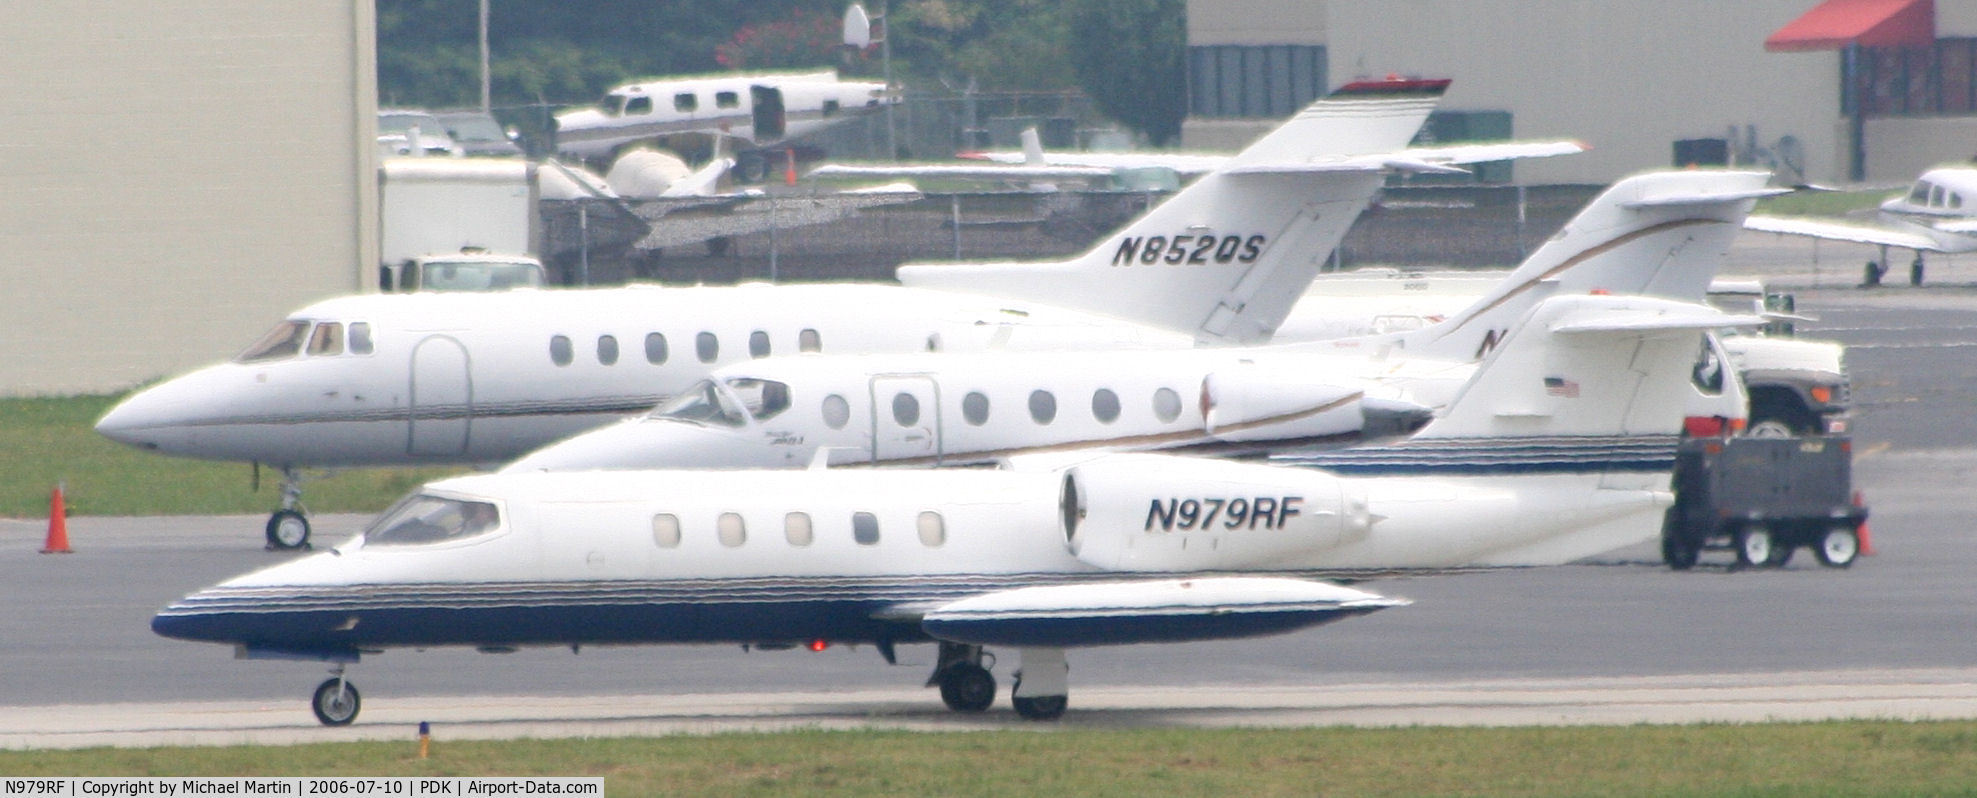 N979RF, 1981 Gates Learjet Corp. 35A C/N 376, Taxing to Signature Air